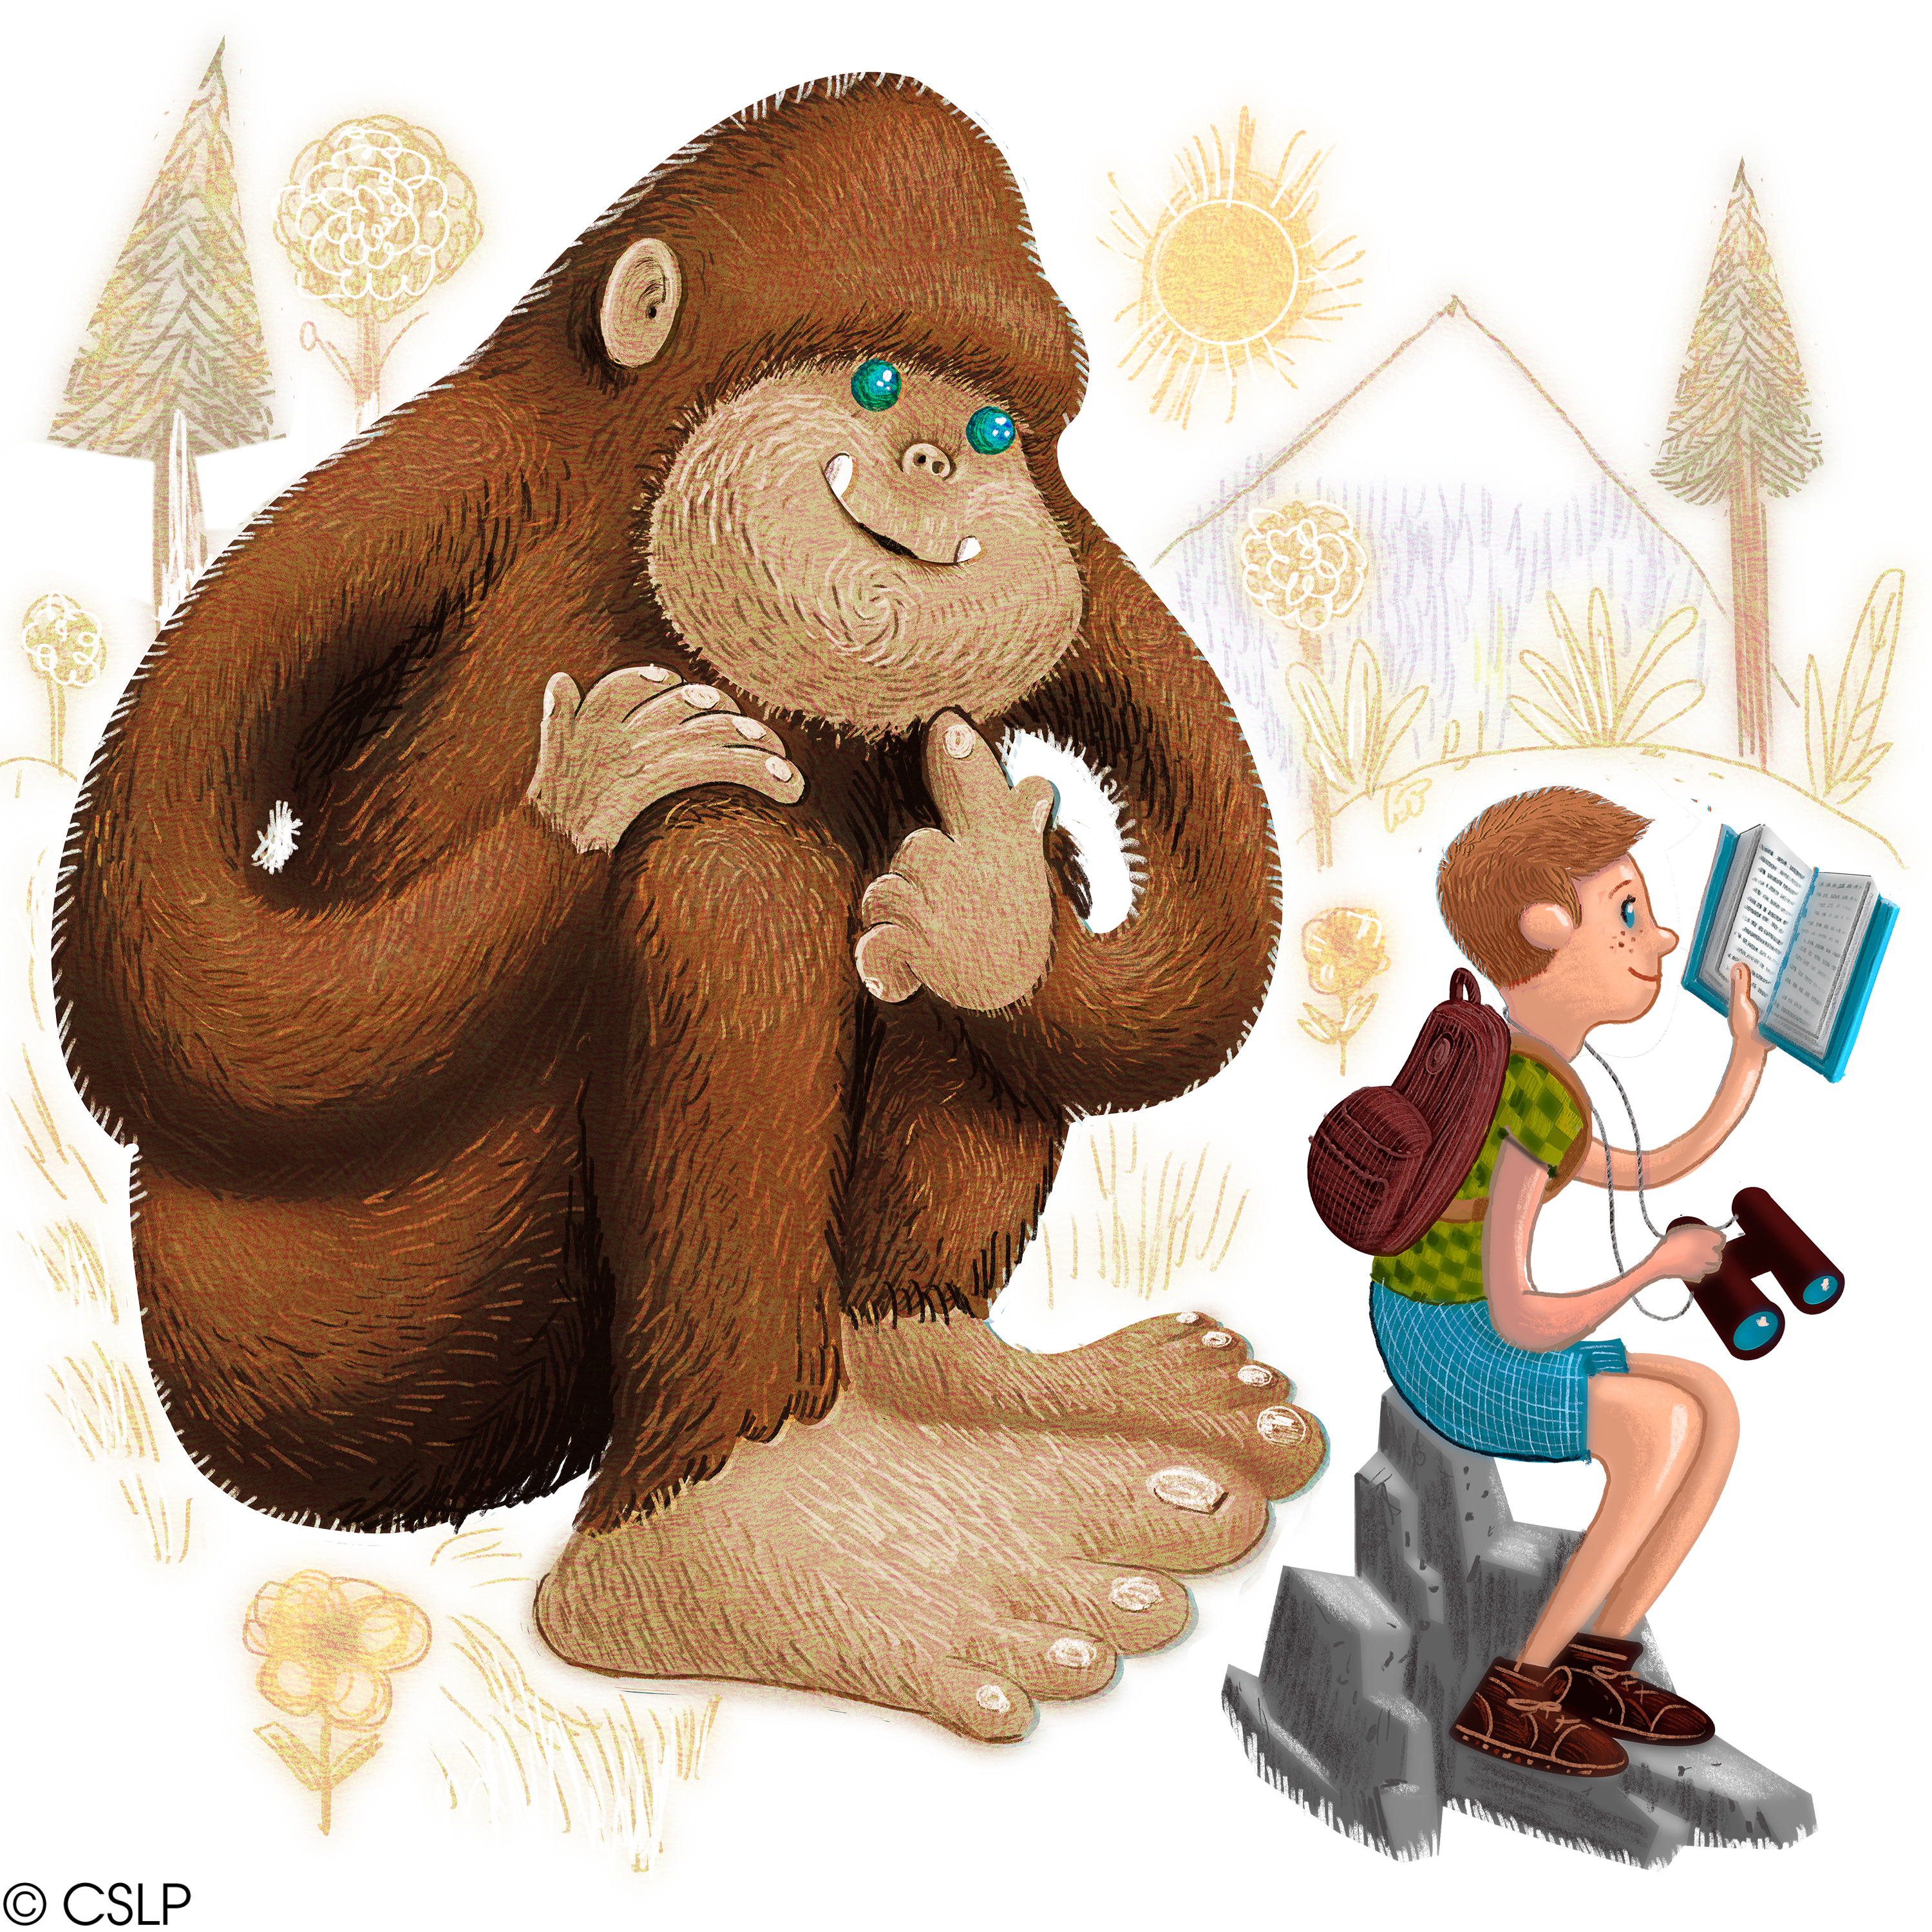 A boy reads a book while sitting on a rock, unaware of a large smiling bigfoot reading over his shoulder